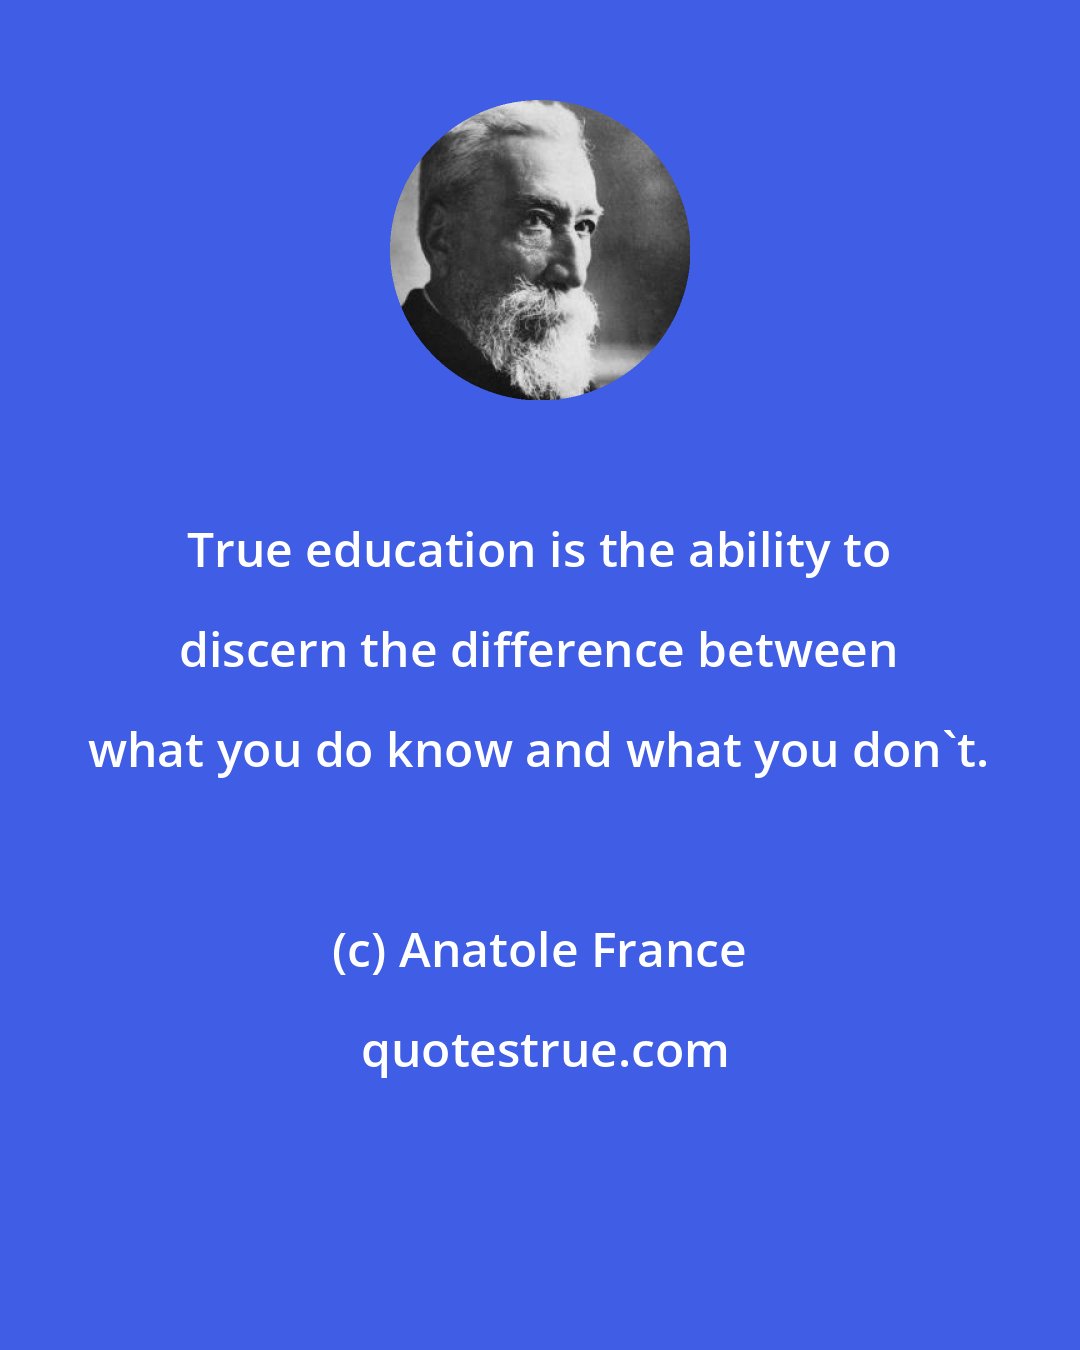 Anatole France: True education is the ability to discern the difference between what you do know and what you don't.